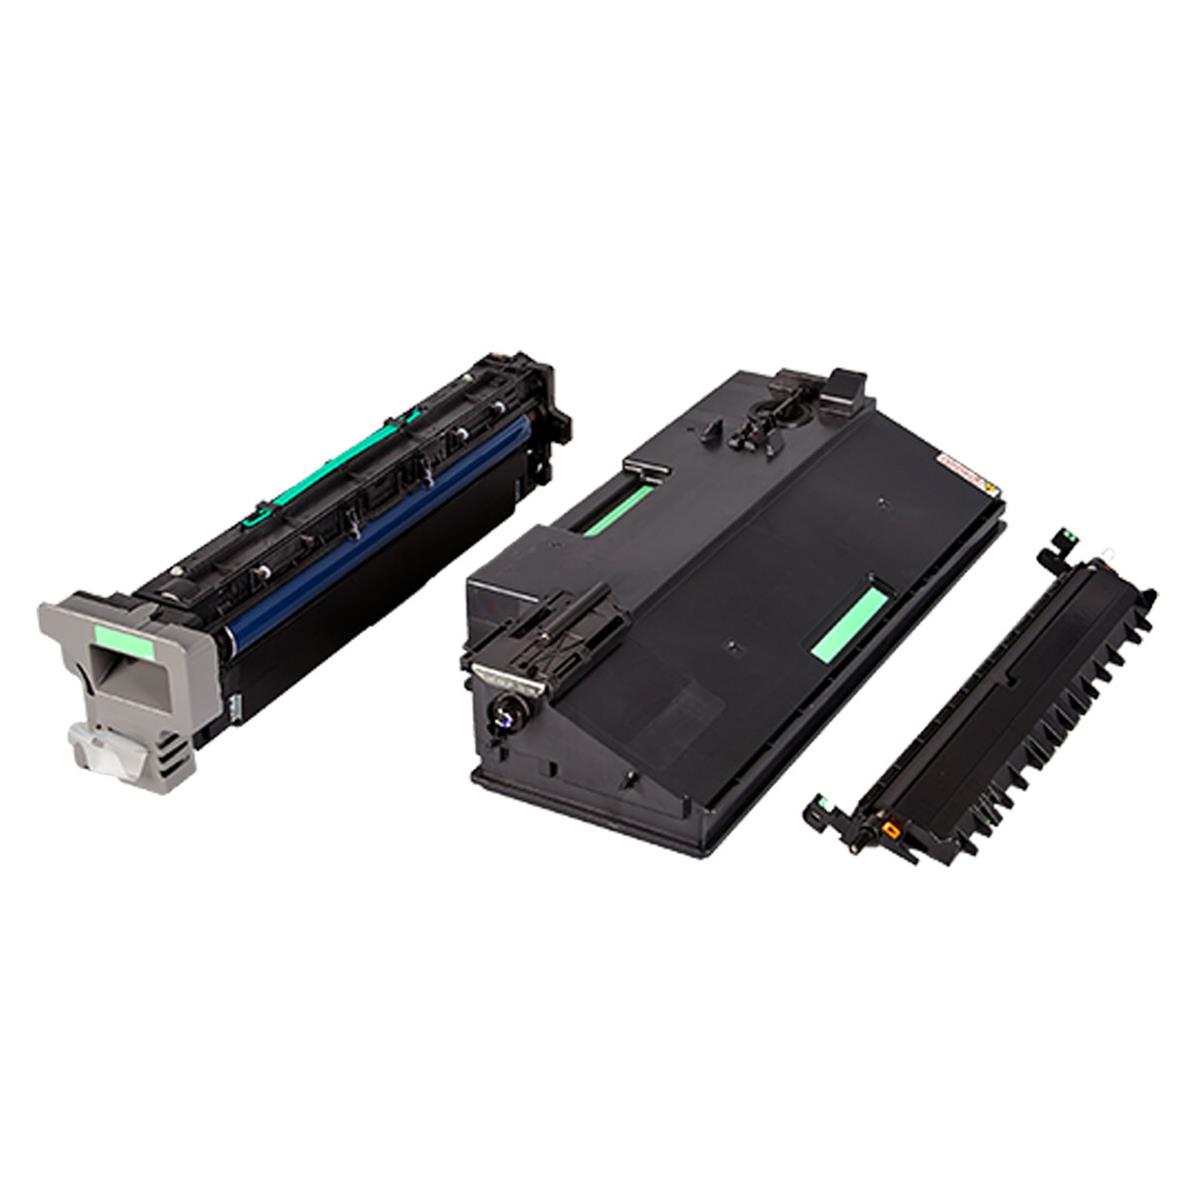 Image of Ricoh Maintenance Kit A for SP 8400DN Black and White Laser Printer